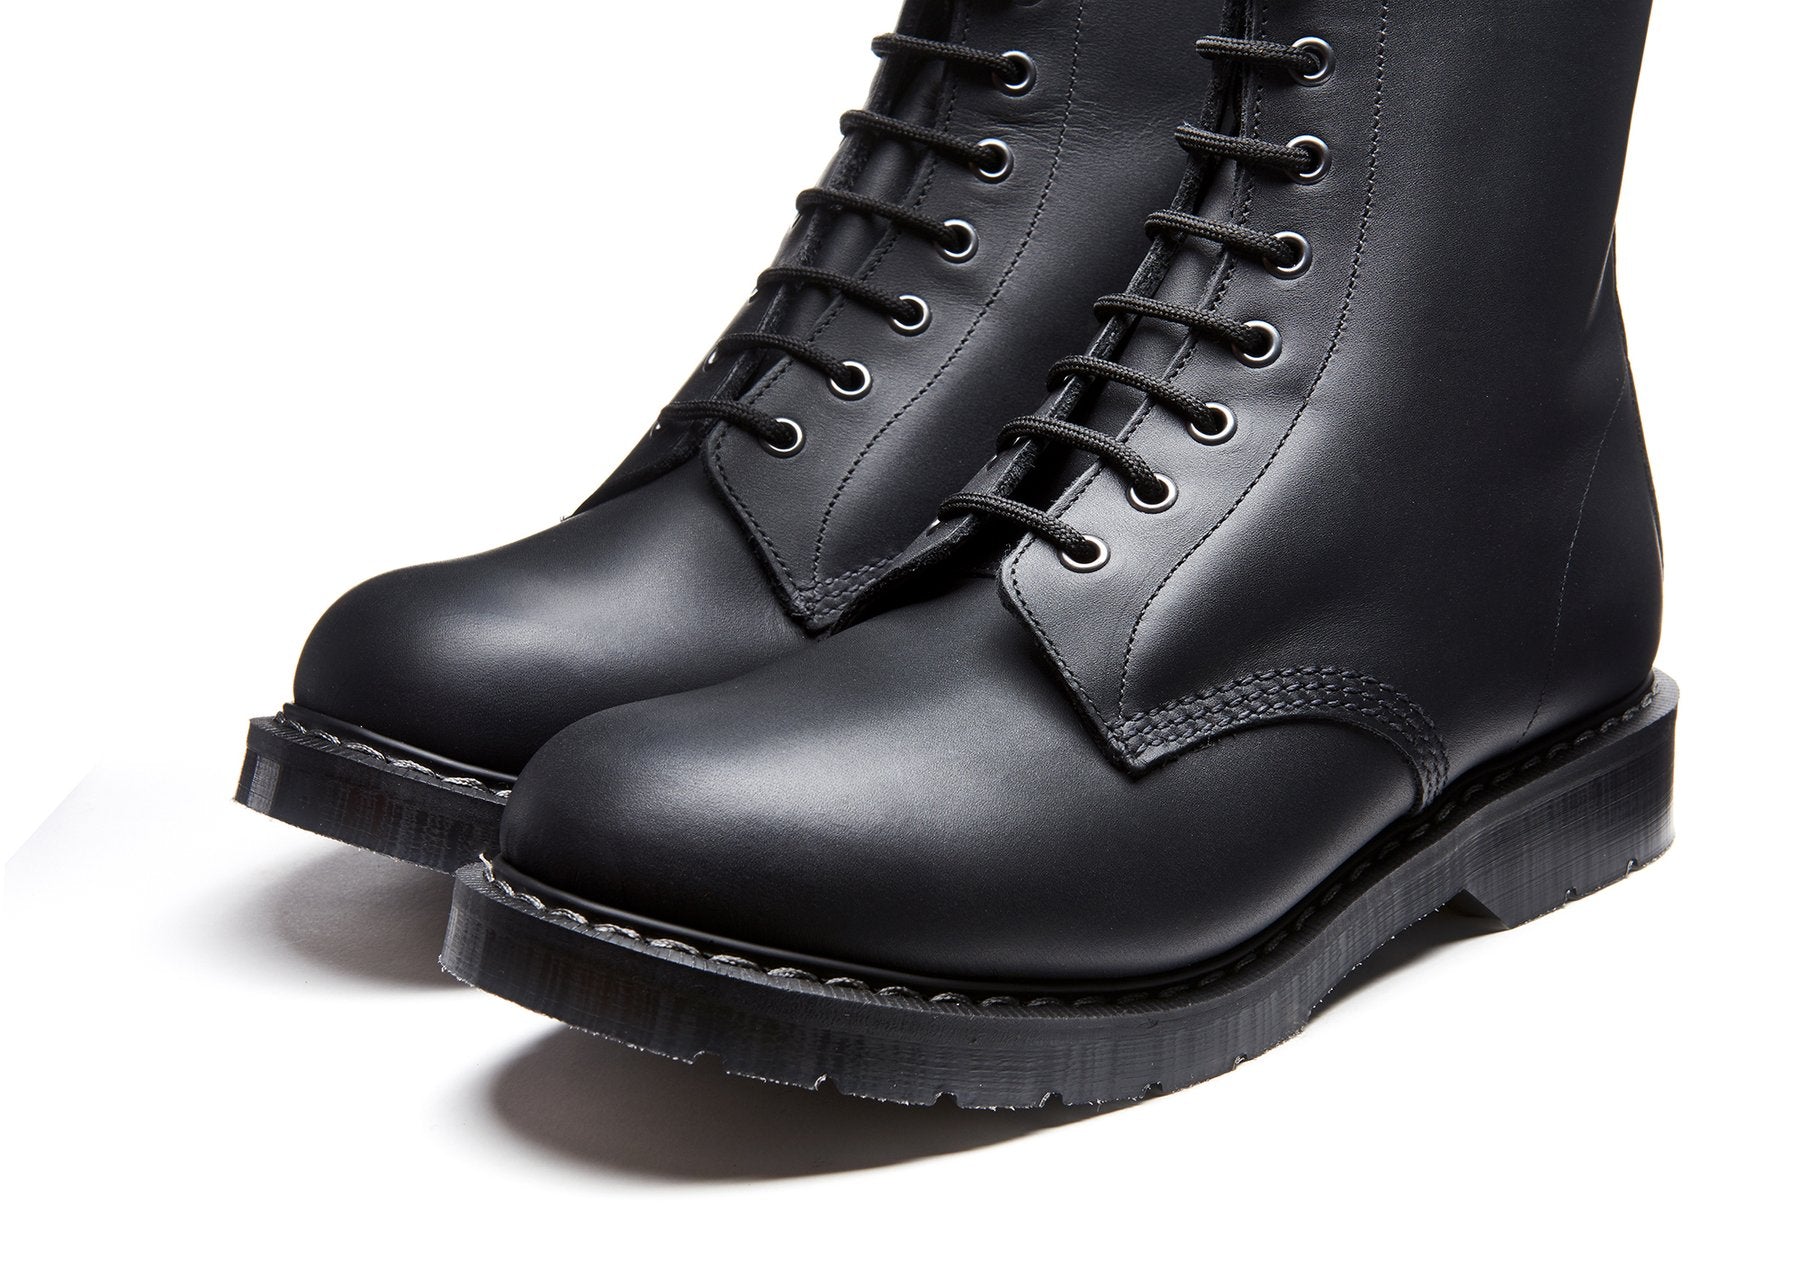 Solovair 8 Eye Derby Boot S8-551-BG-G Unisex Black Greasy Leather Lace Up Ankle Boots